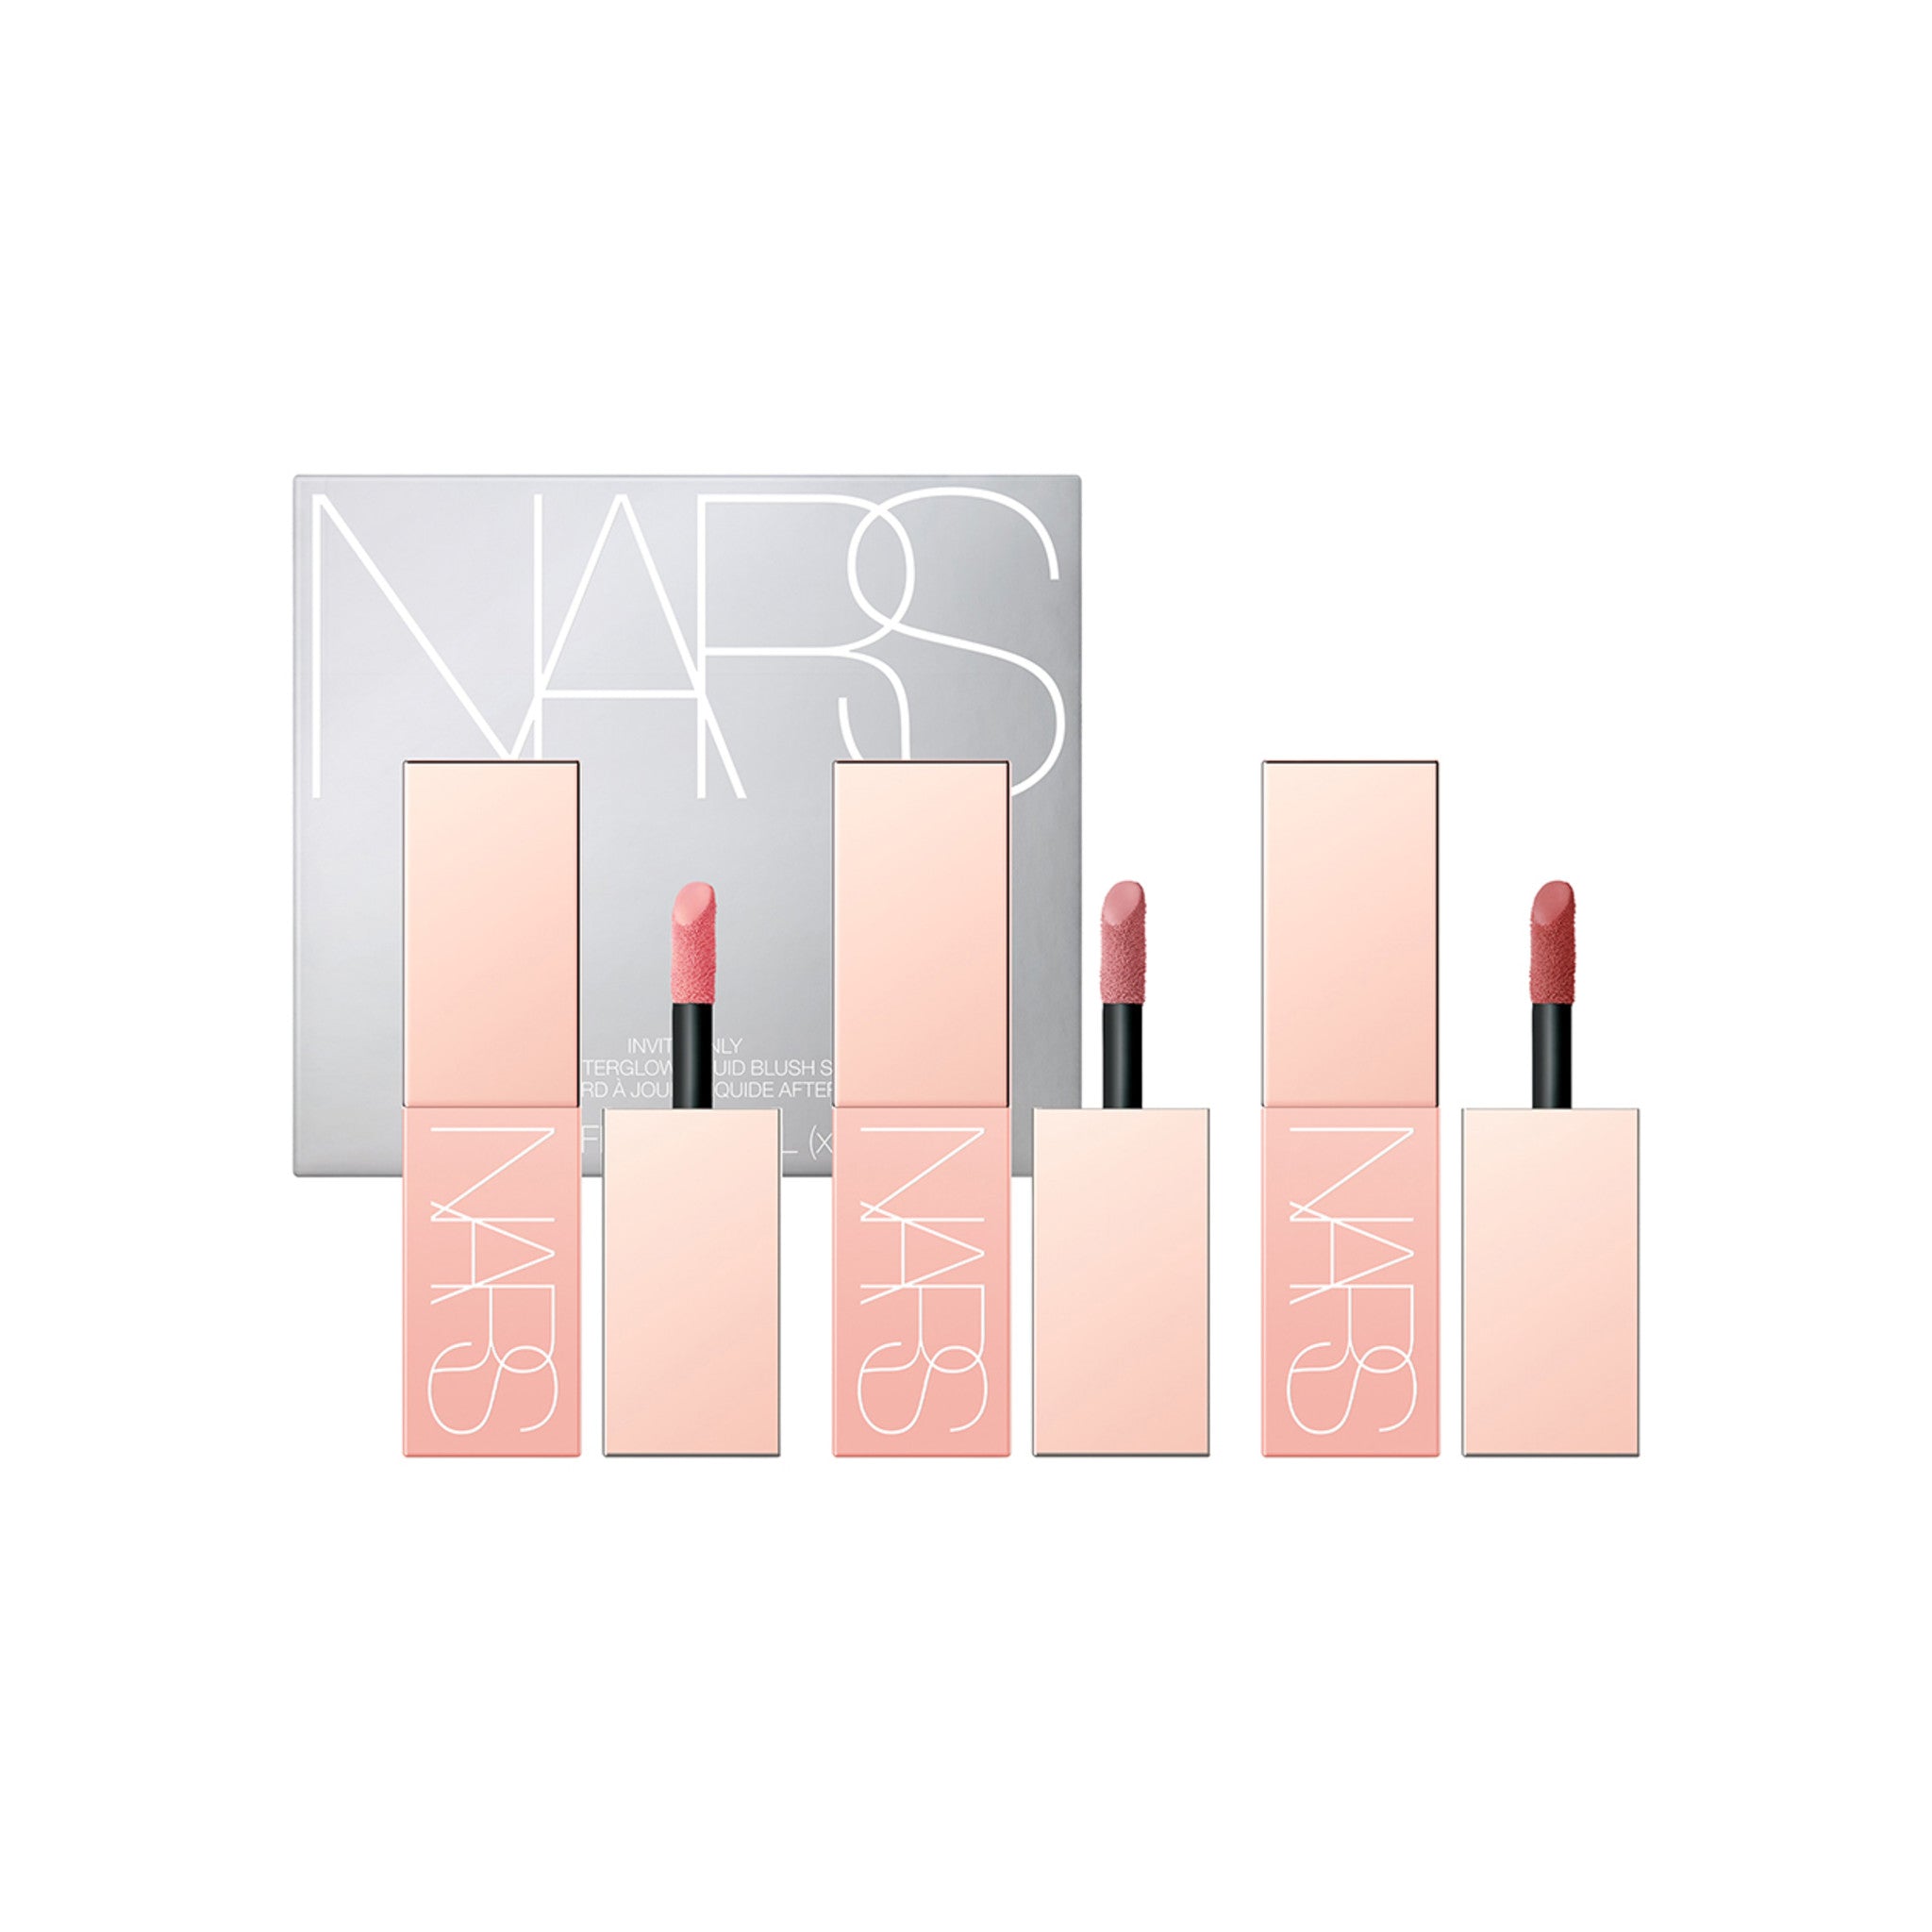 EVENT] *FREE ITEM* How To Get NARS Blush Pink Hair with Bangs on